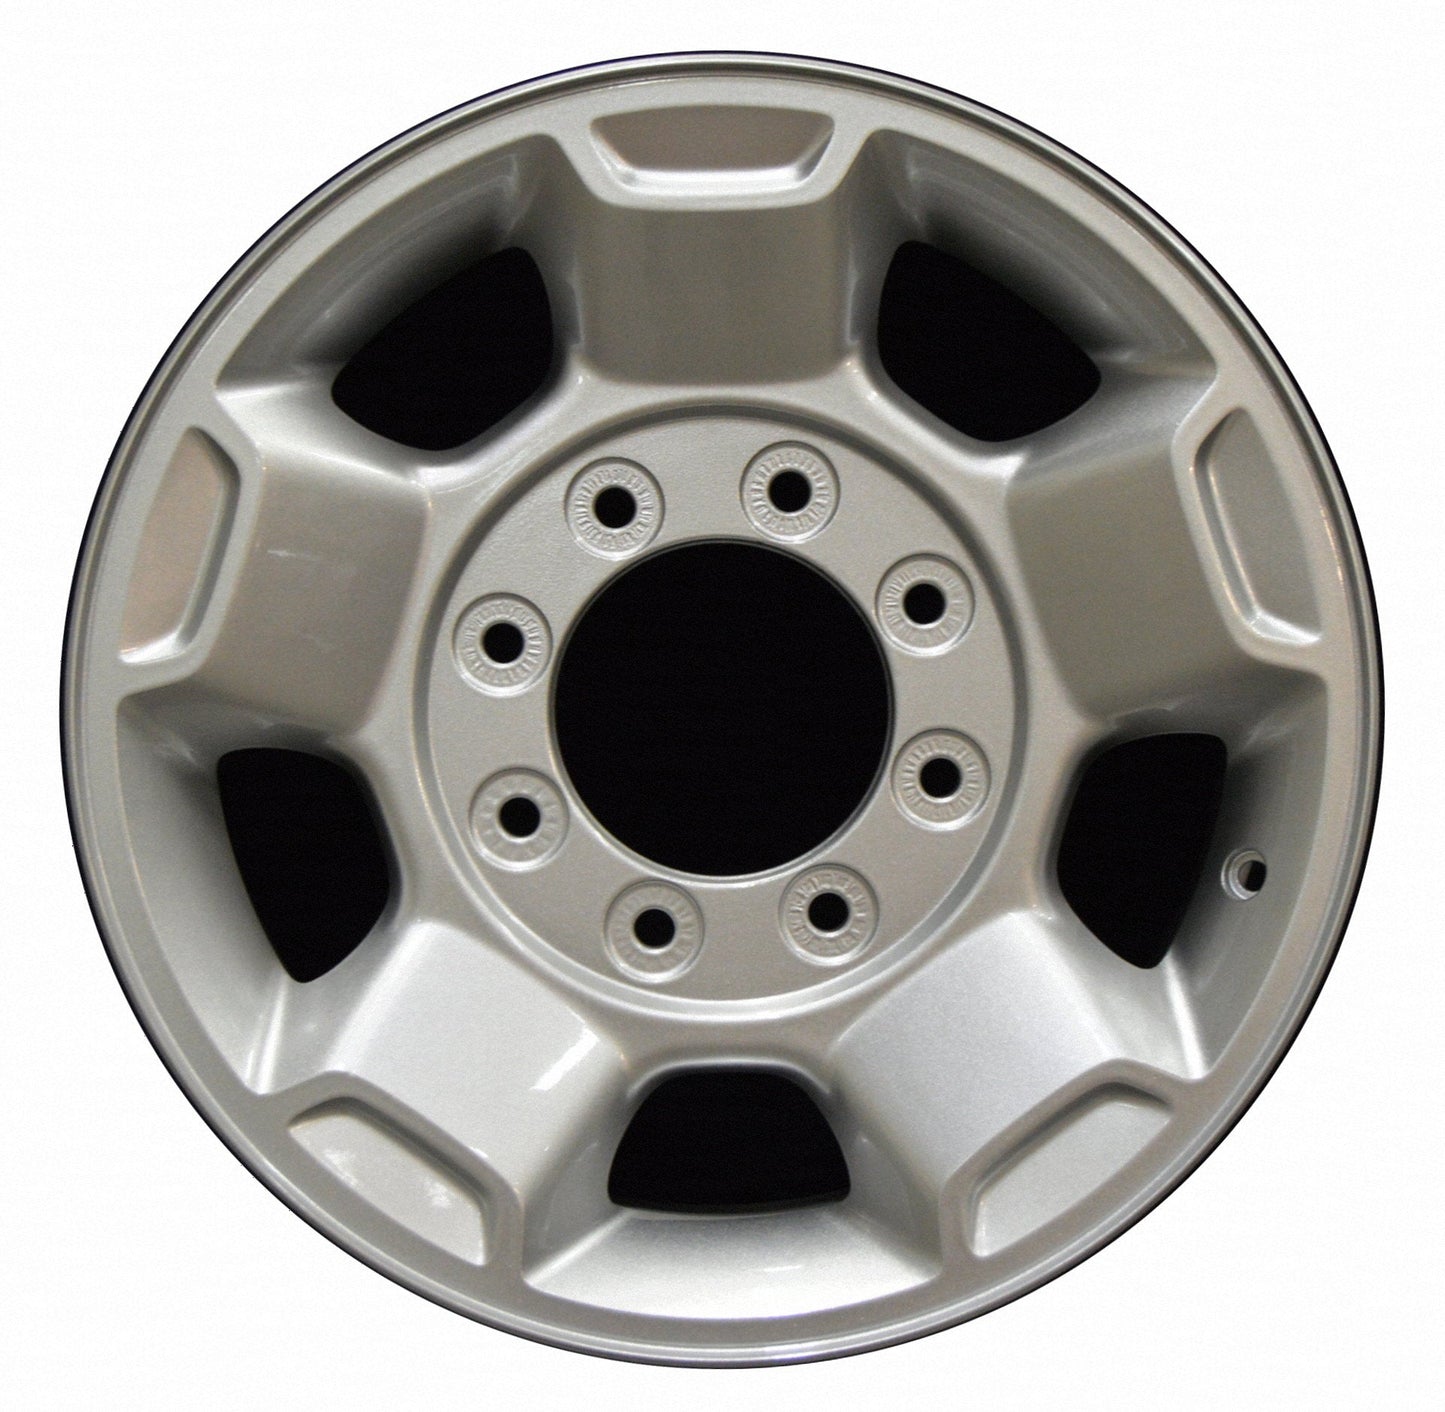 Ford F250 F350 Truck  2010, 2011, 2012 Factory OEM Car Wheel Size 17x7.5 Alloy WAO.3829.PS08.FF